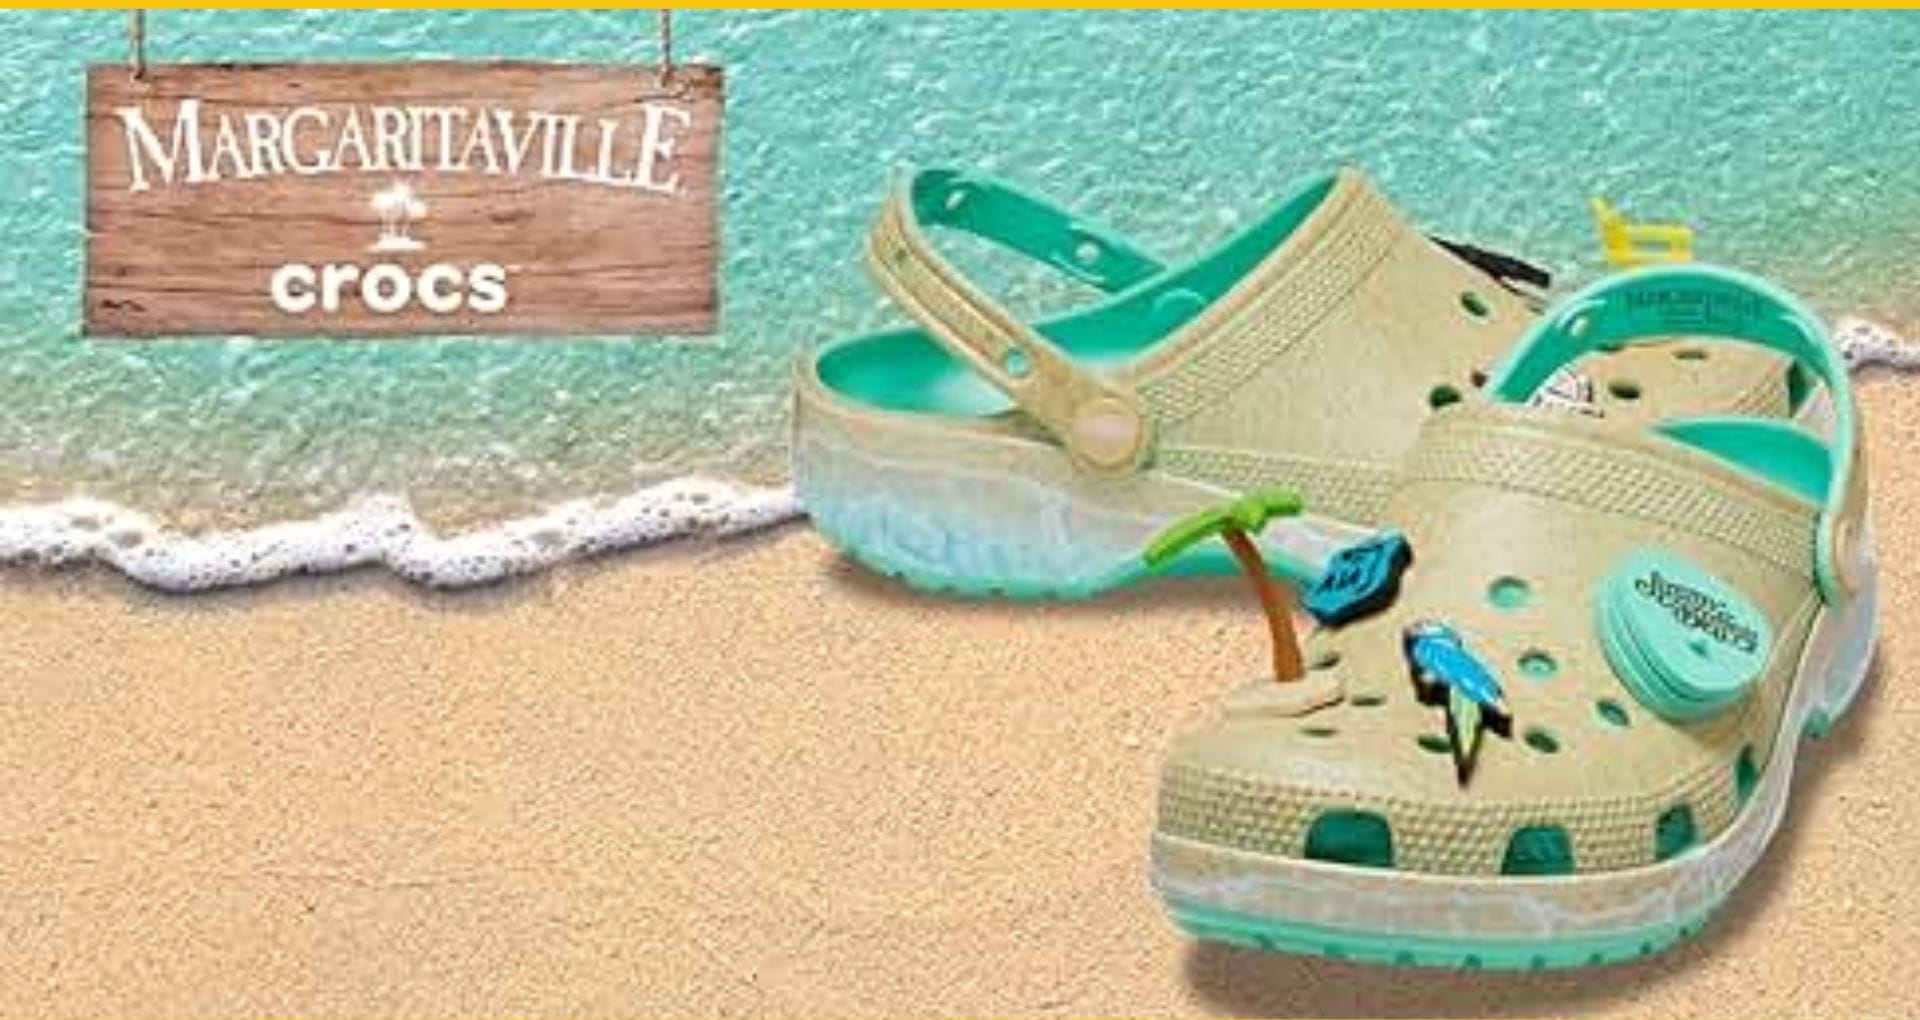 Margaritaville Crocs - Crocs have made their way into every part of society